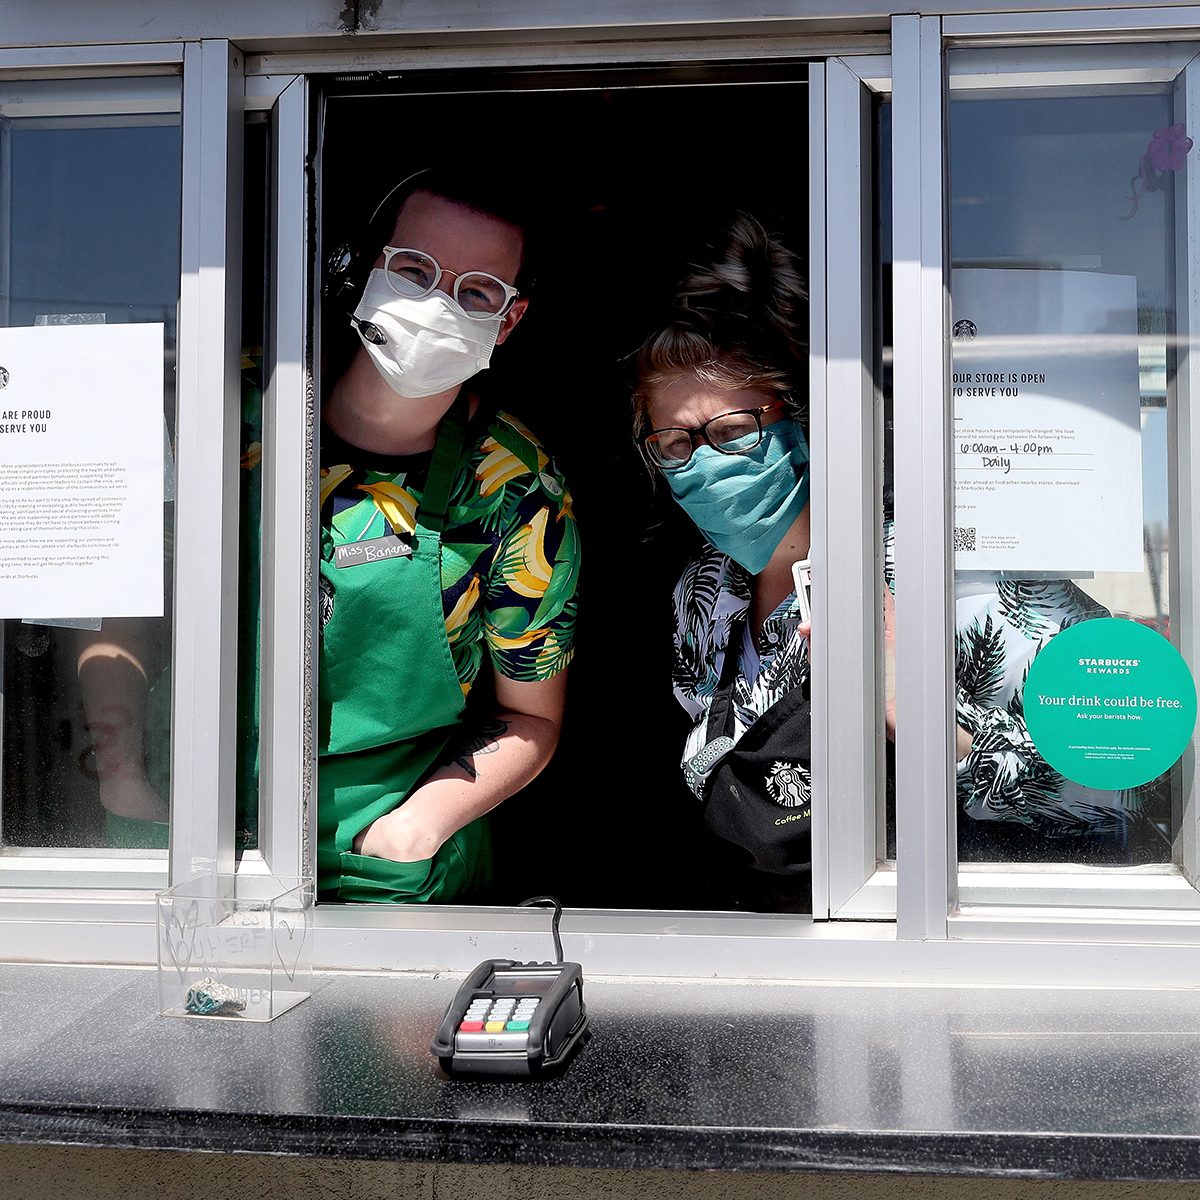 EDGEWATER, COLORADO - APRIL 07: Starbucks employees wear a mask while working the drive-thru window on April 07, 2020 in Edgewater, Colorado. Starting today Starbucks will require all employees to wear facemasks at work. The chain has closed in-store cafes however drive-thru locations remain open. (Photo by Matthew Stockman/Getty Images)